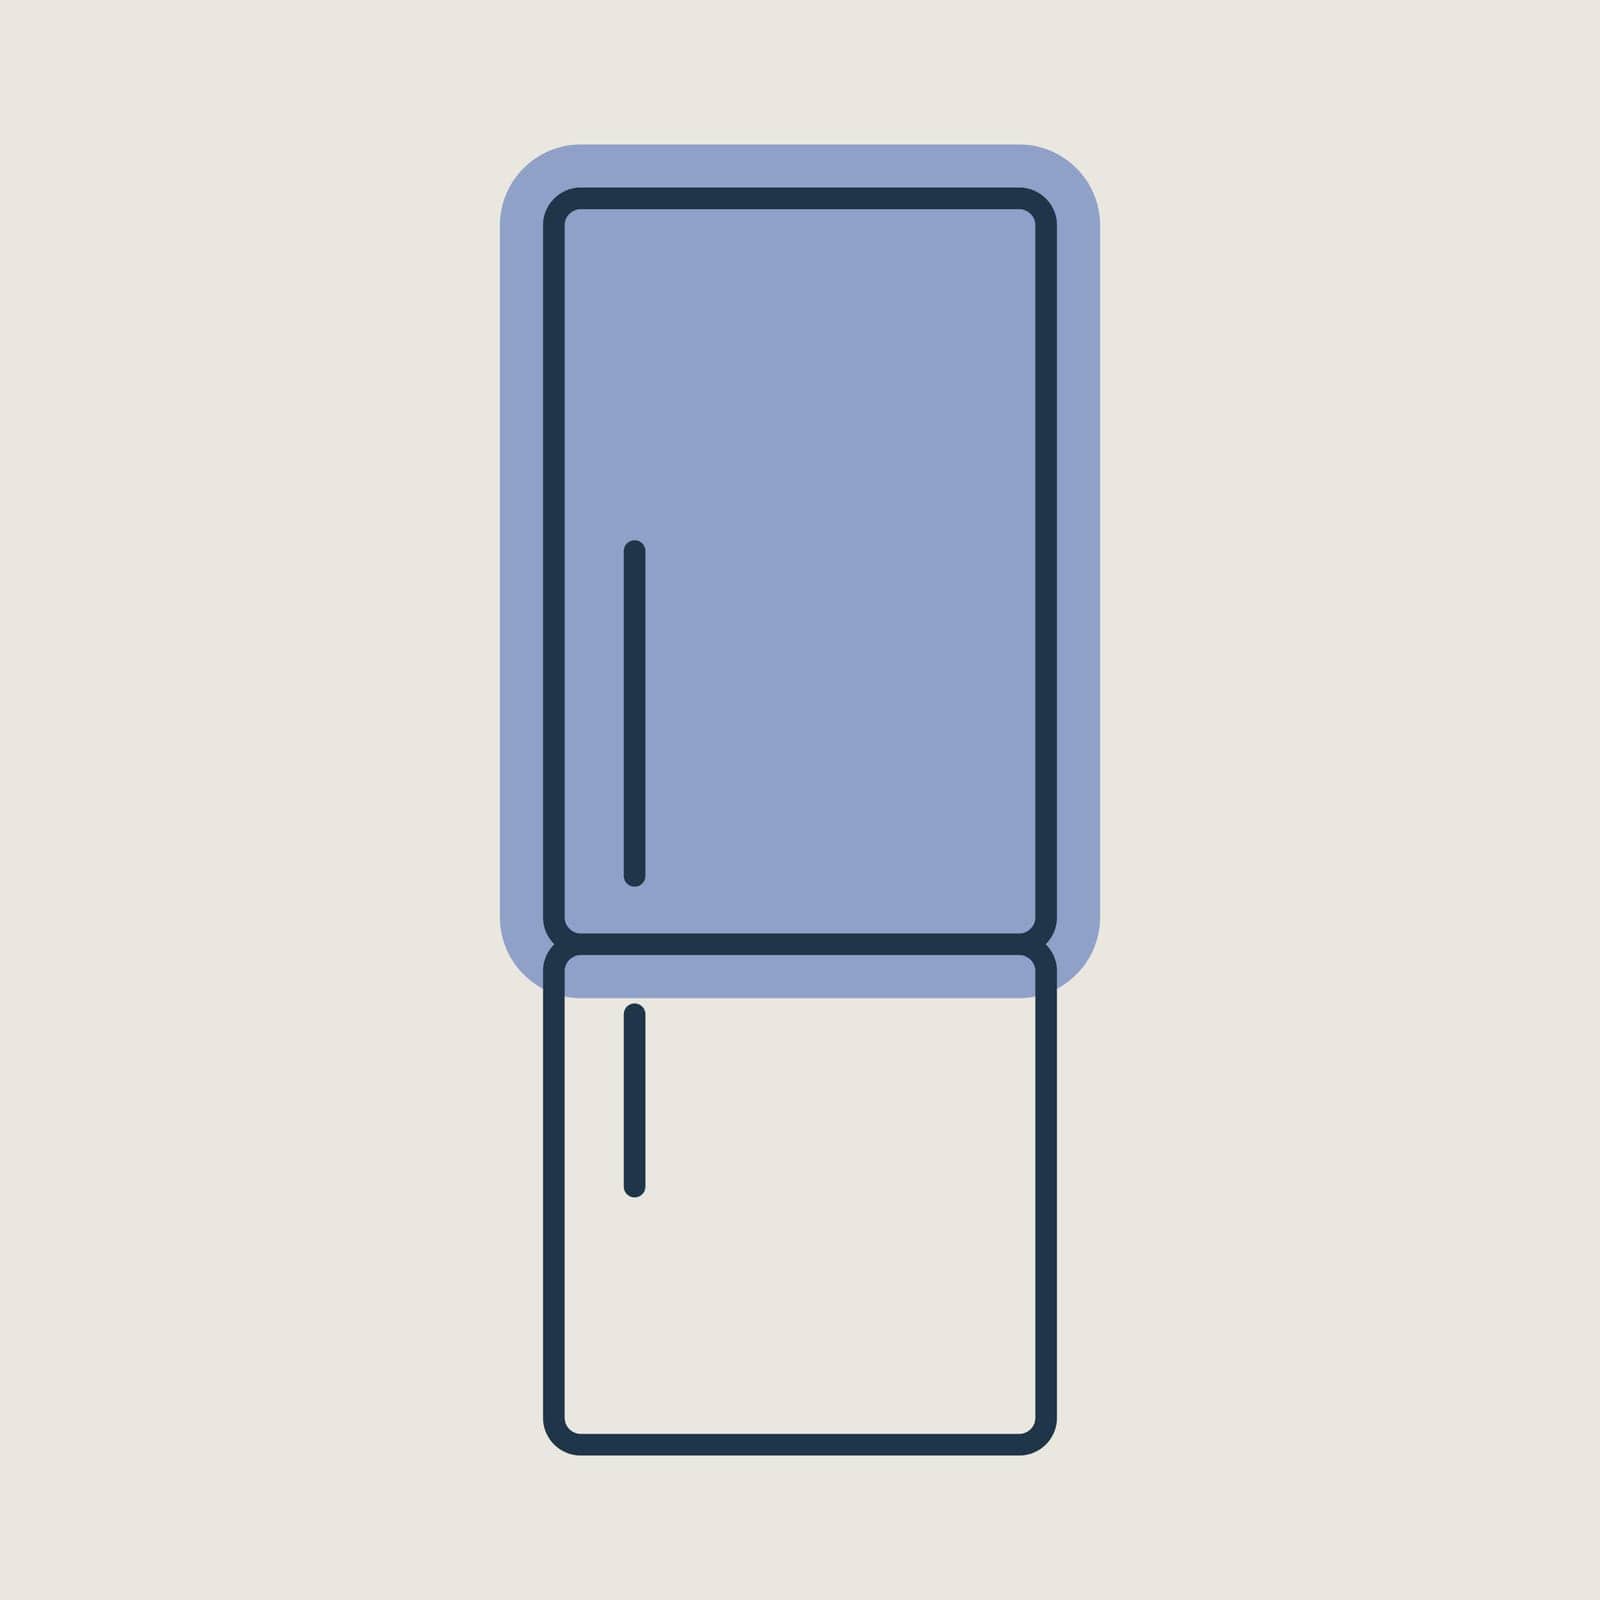 Refrigerator vector icon. Electric kitchen appliance. Graph symbol for cooking web site design, logo, app, UI